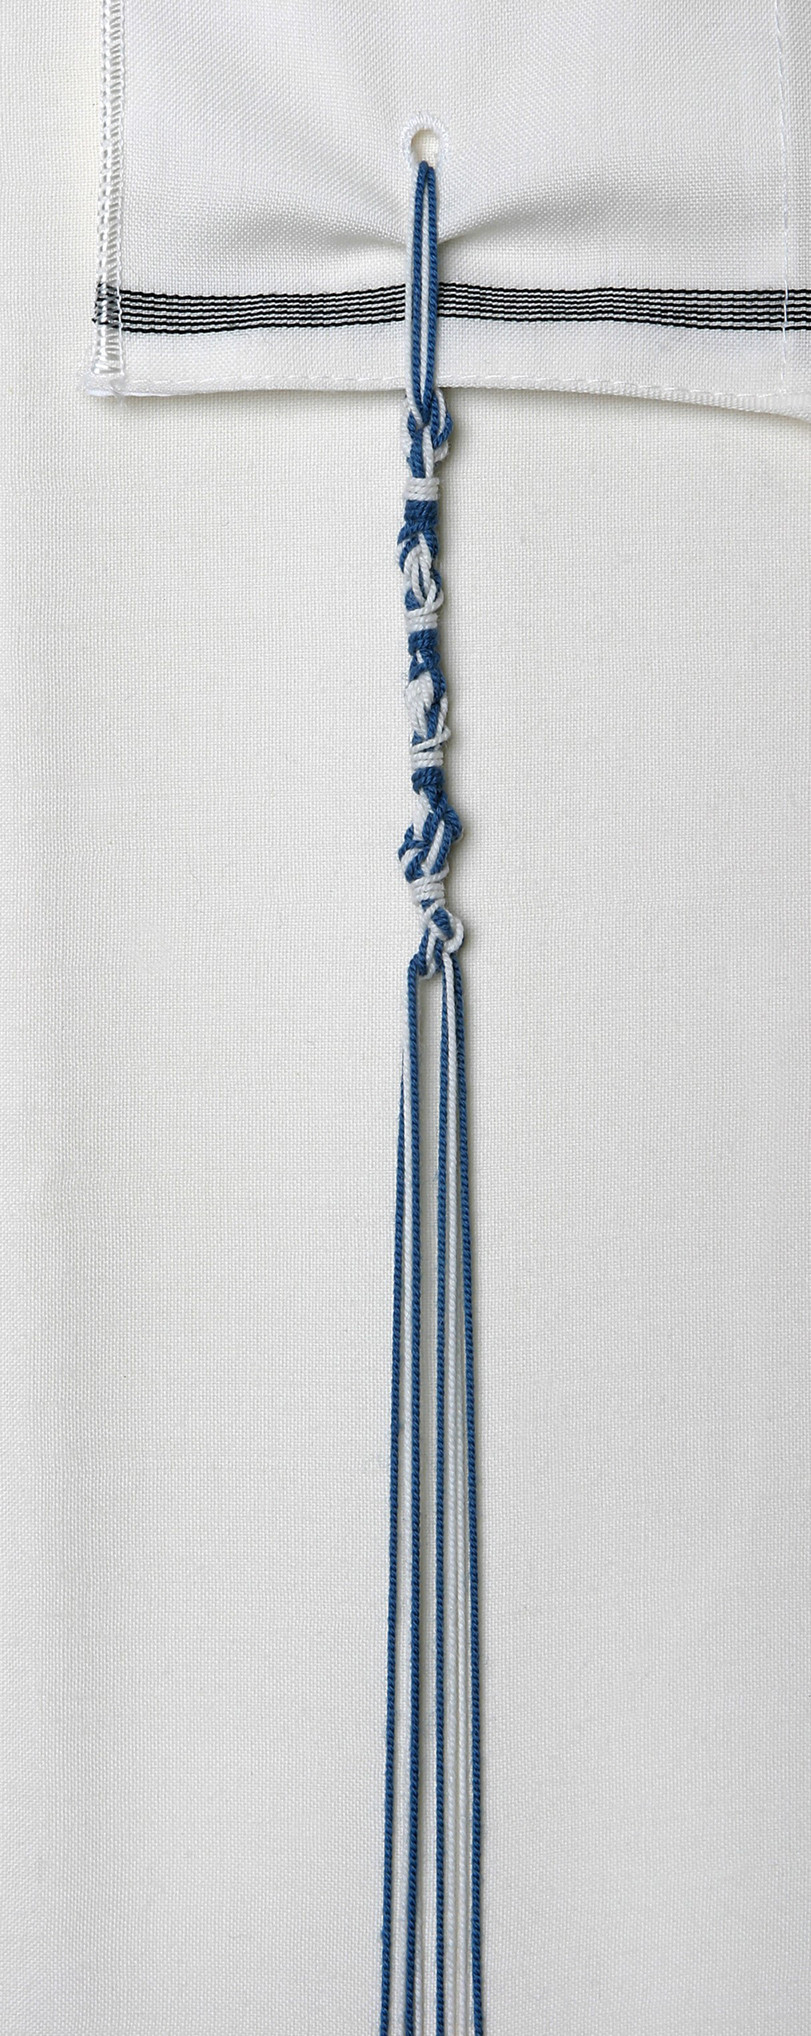 Tzitzit tassels with threads dyed in tekhelet blue produced from Murex trunculus snails.